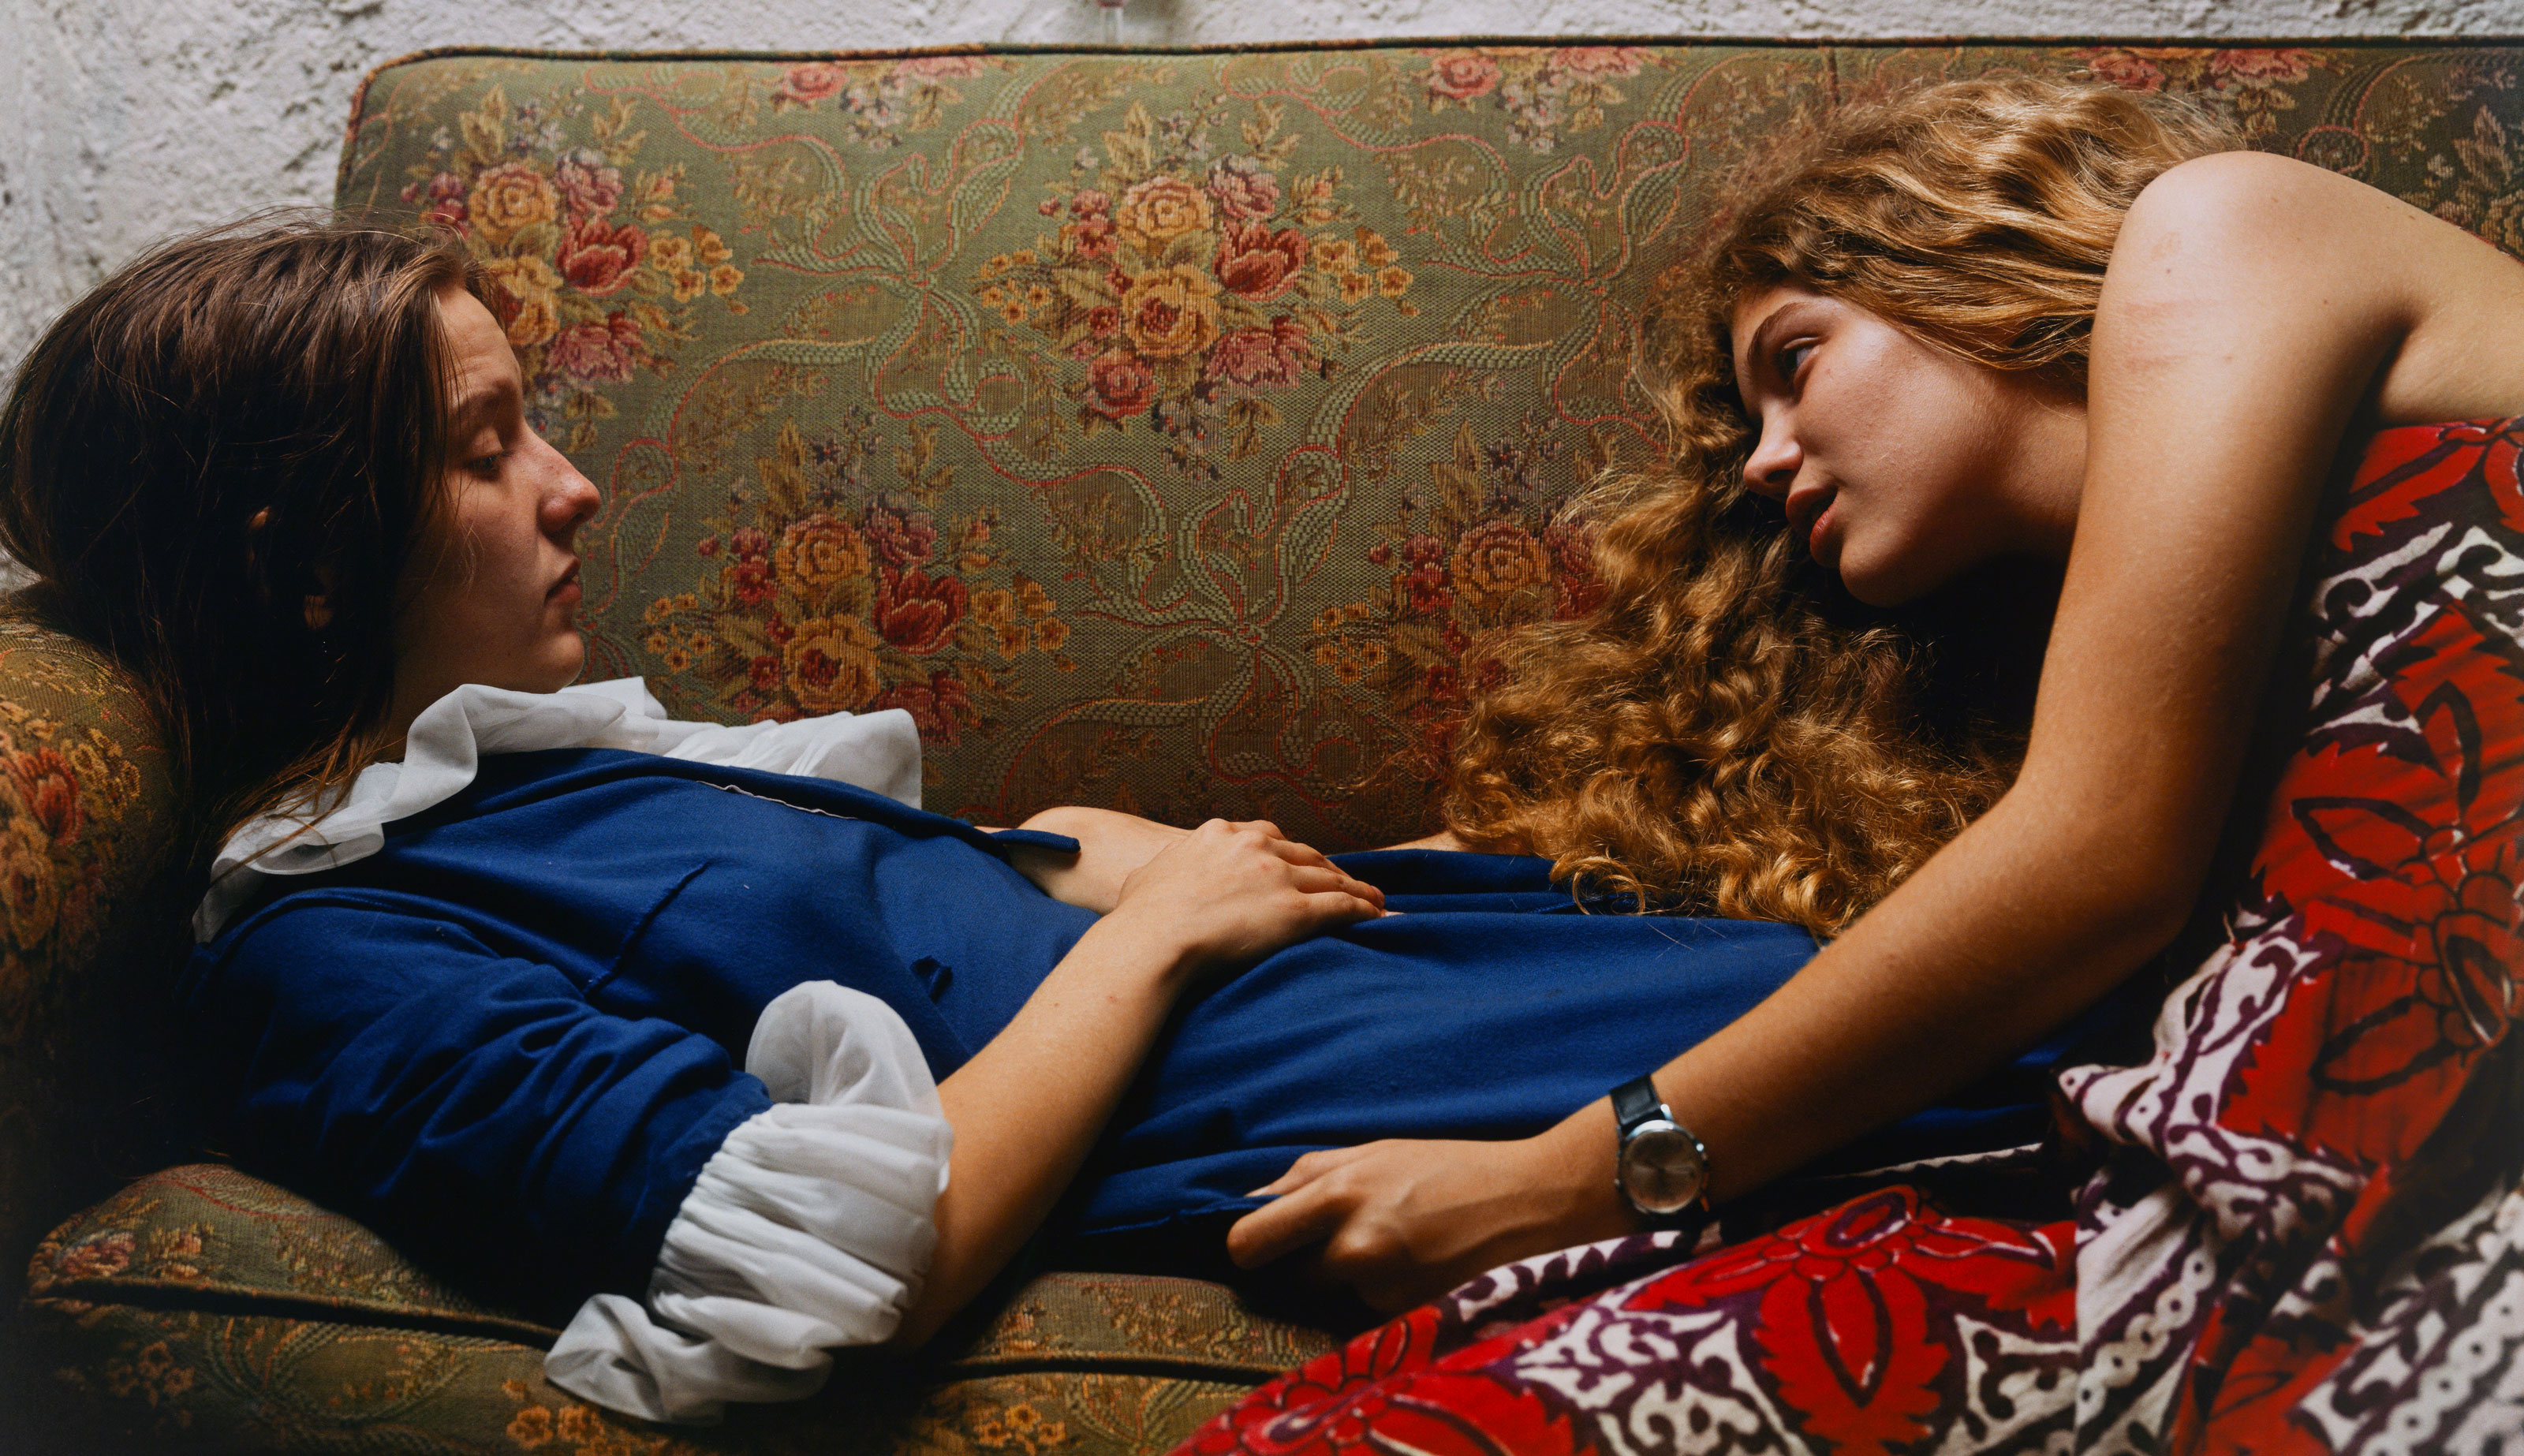 A photograph by William Eggleston, titled Untitled, dated 1973